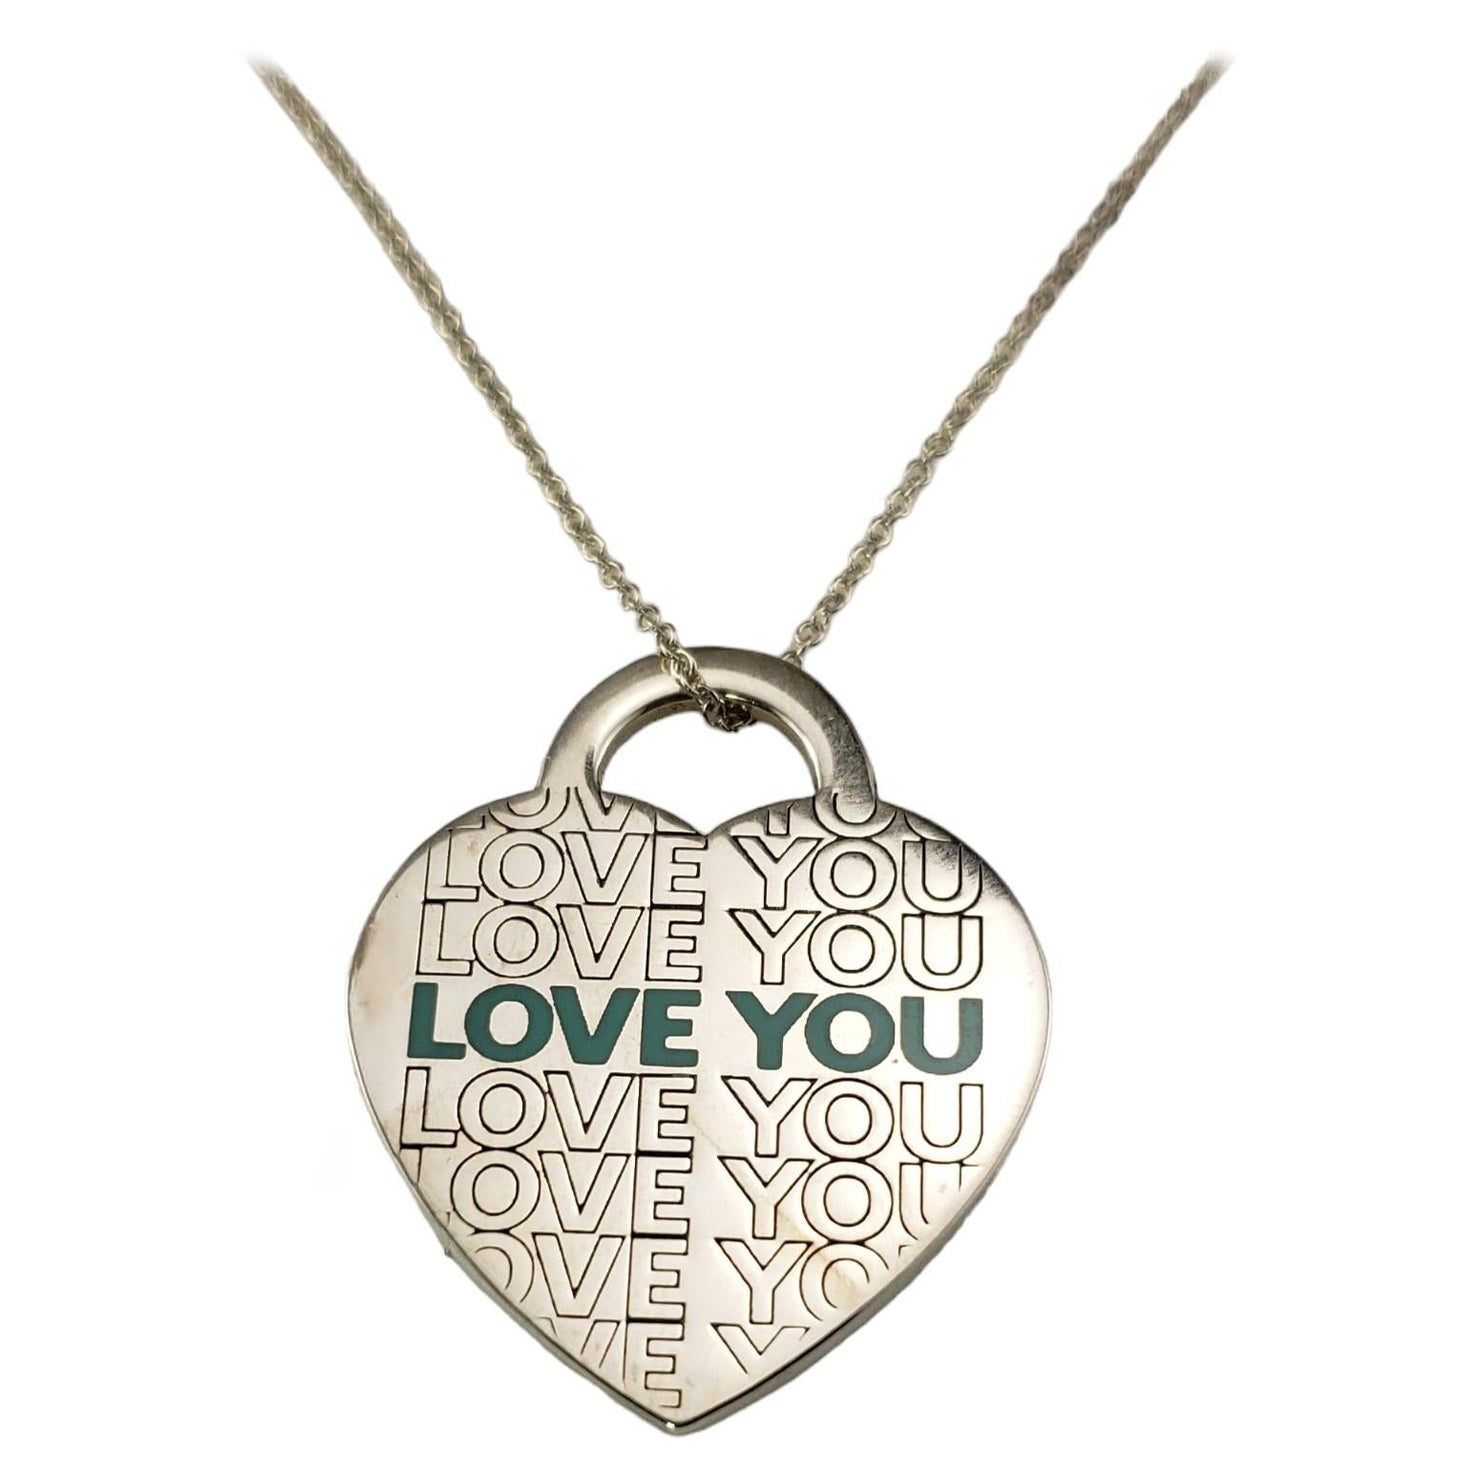 Tiffany & Co. Sterling Silver "Love You" Heart Pendant Necklace Box #17084